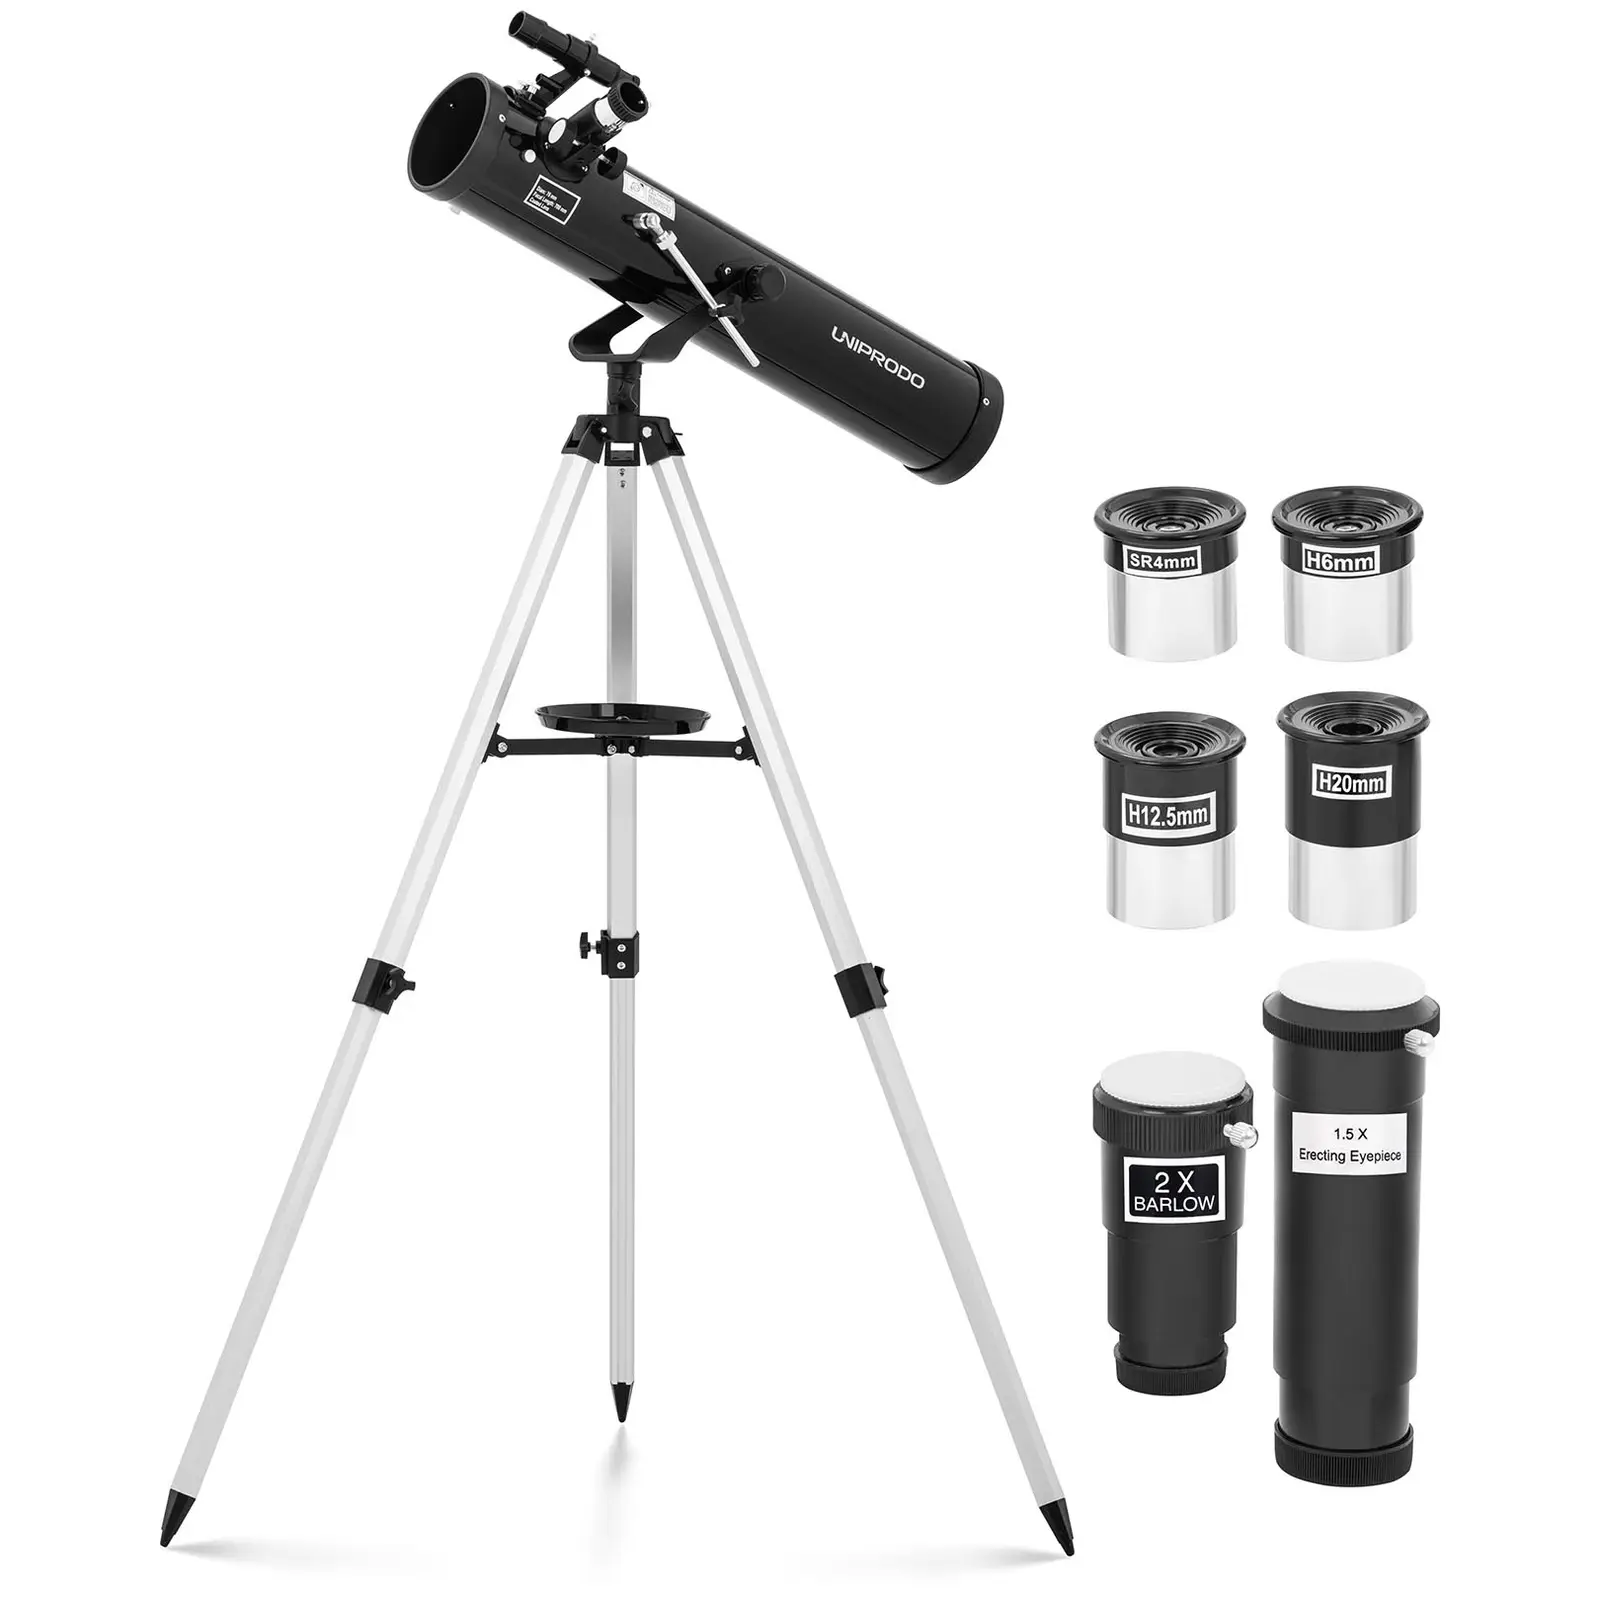 Black Telescopes for professionals and beginners